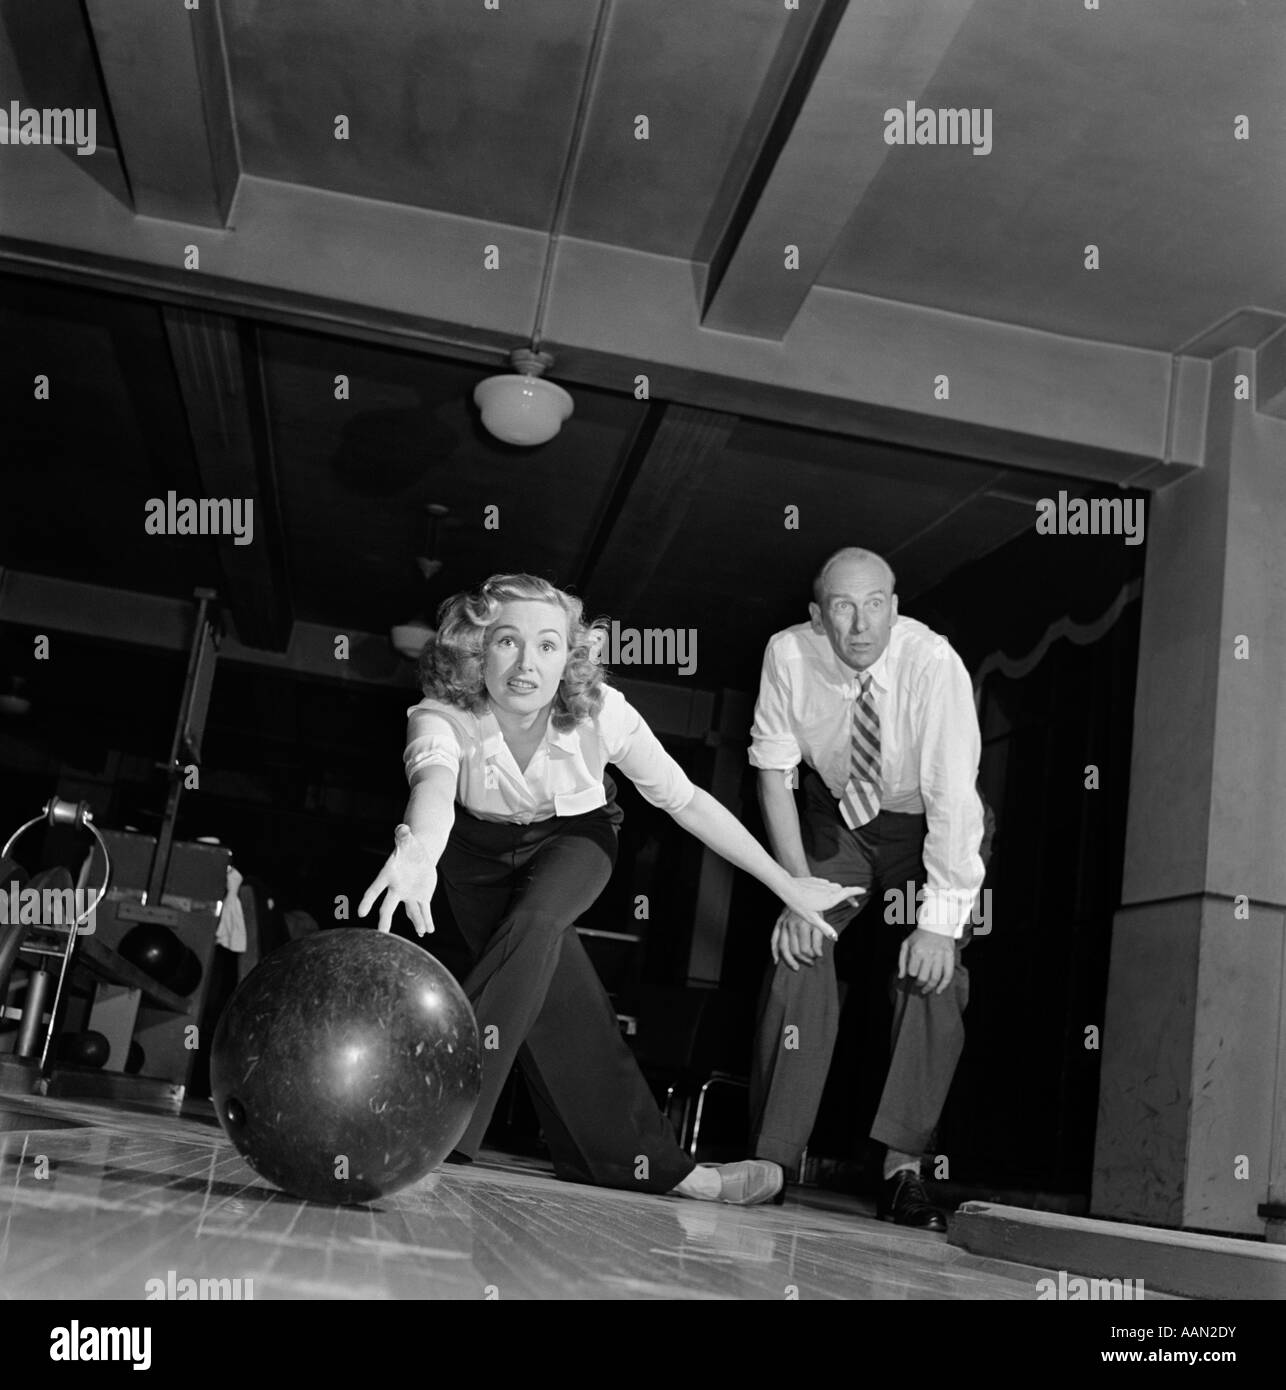 1950s WOMAN RELEASING BOWLING BALL DOWN ALLEY MAN WATCHING Stock Photo